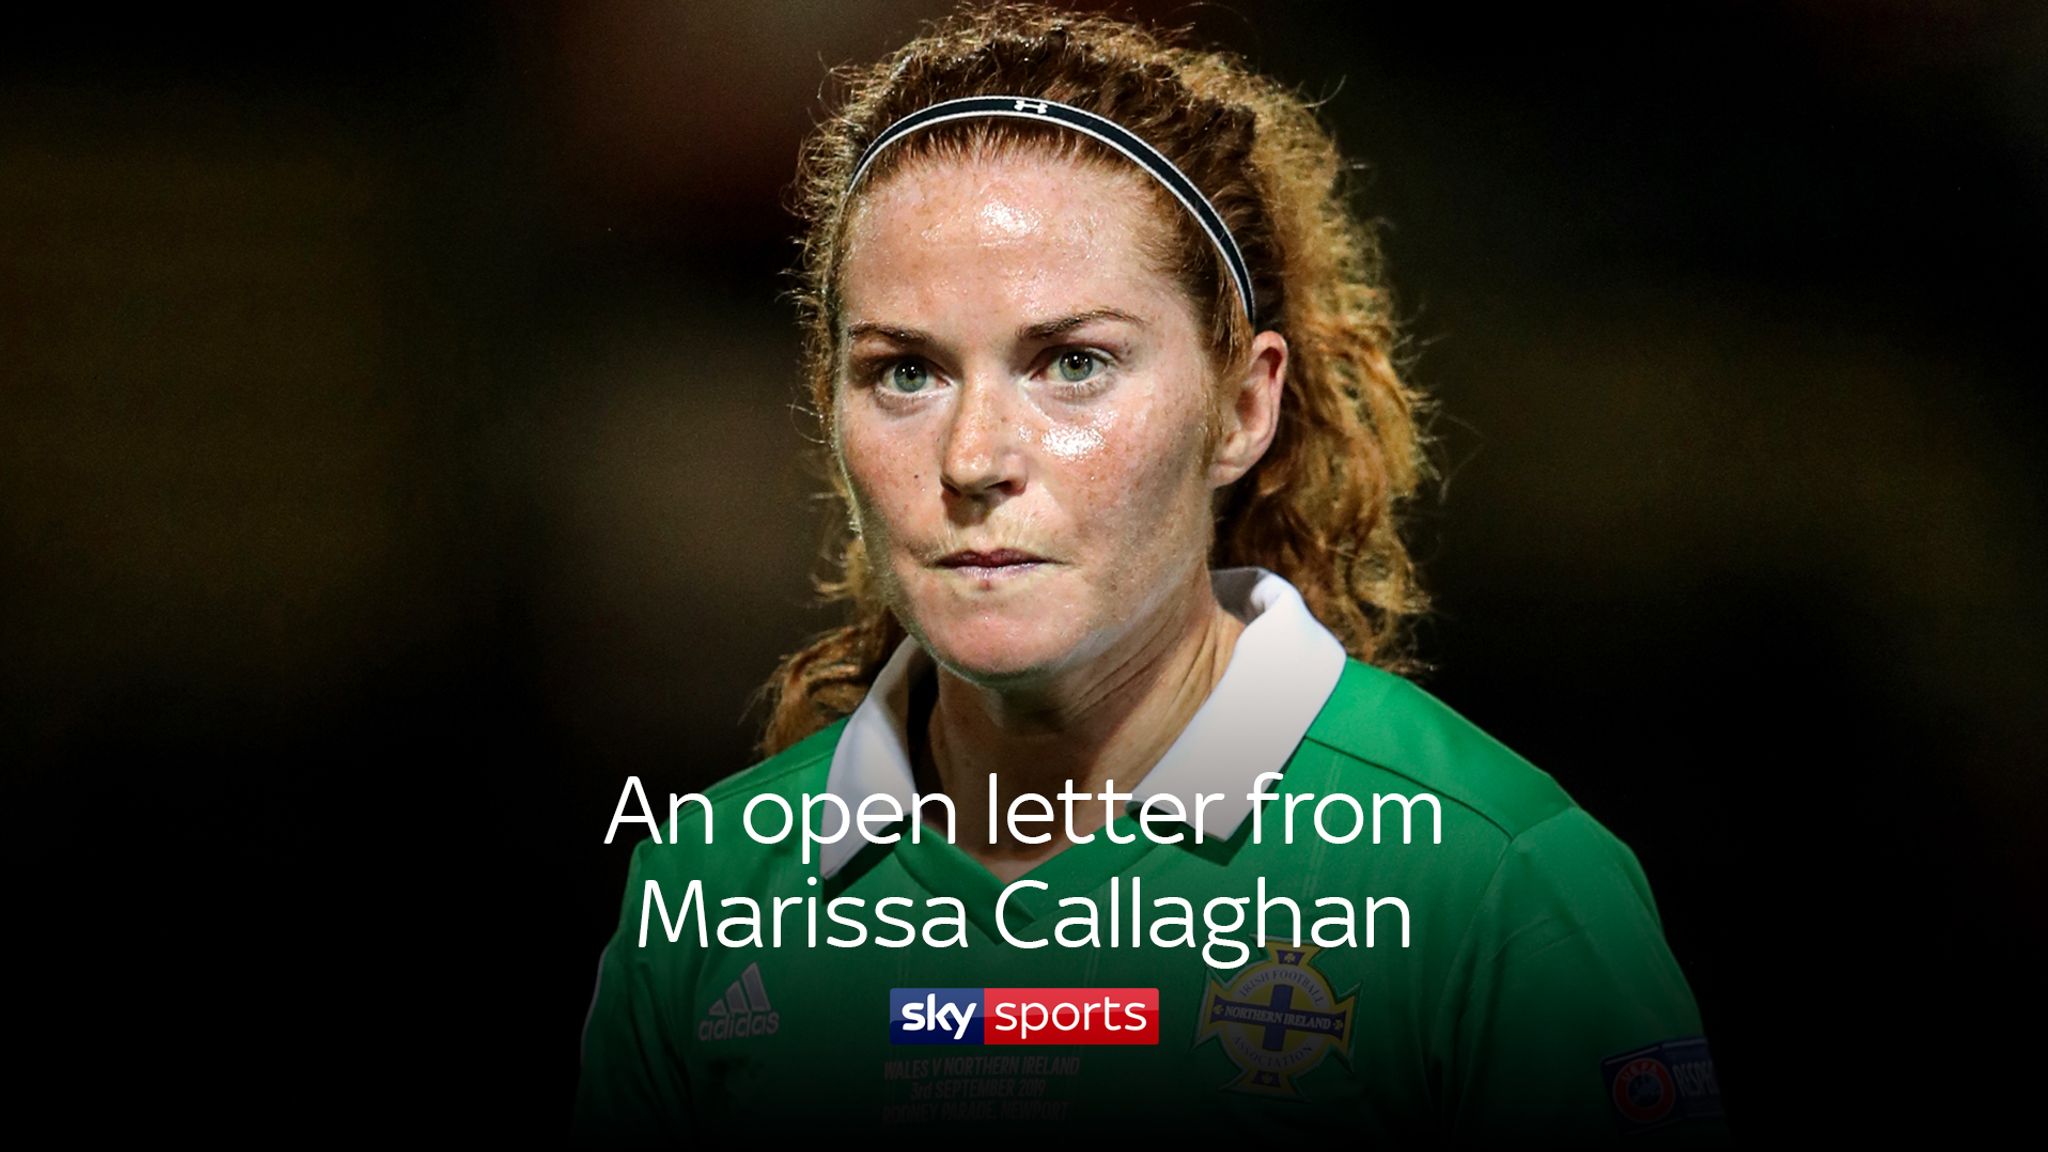 Marissa Callaghan S Open Letter Northern Ireland Women Captain Pens Open Letter Highlighting Acts Of Kindness Football News Sky Sports